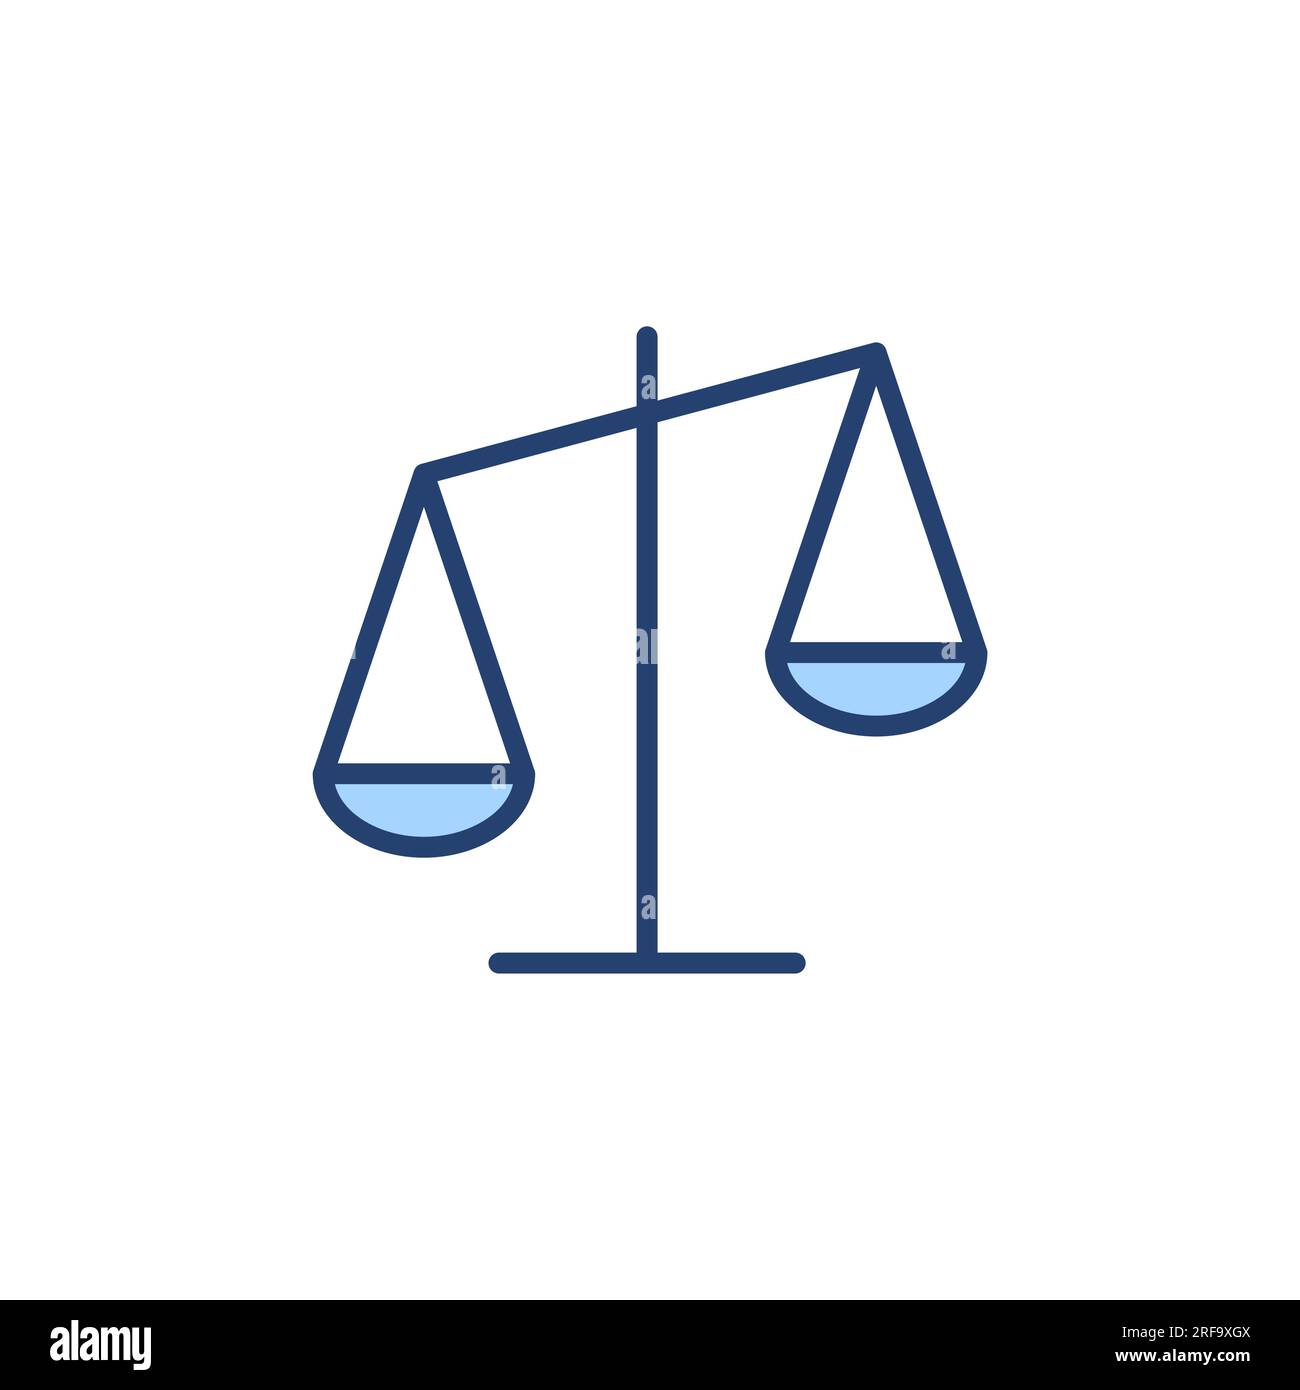 https://c8.alamy.com/comp/2RF9XGX/scales-icon-vector-law-scale-icon-justice-sign-and-symbol-2RF9XGX.jpg